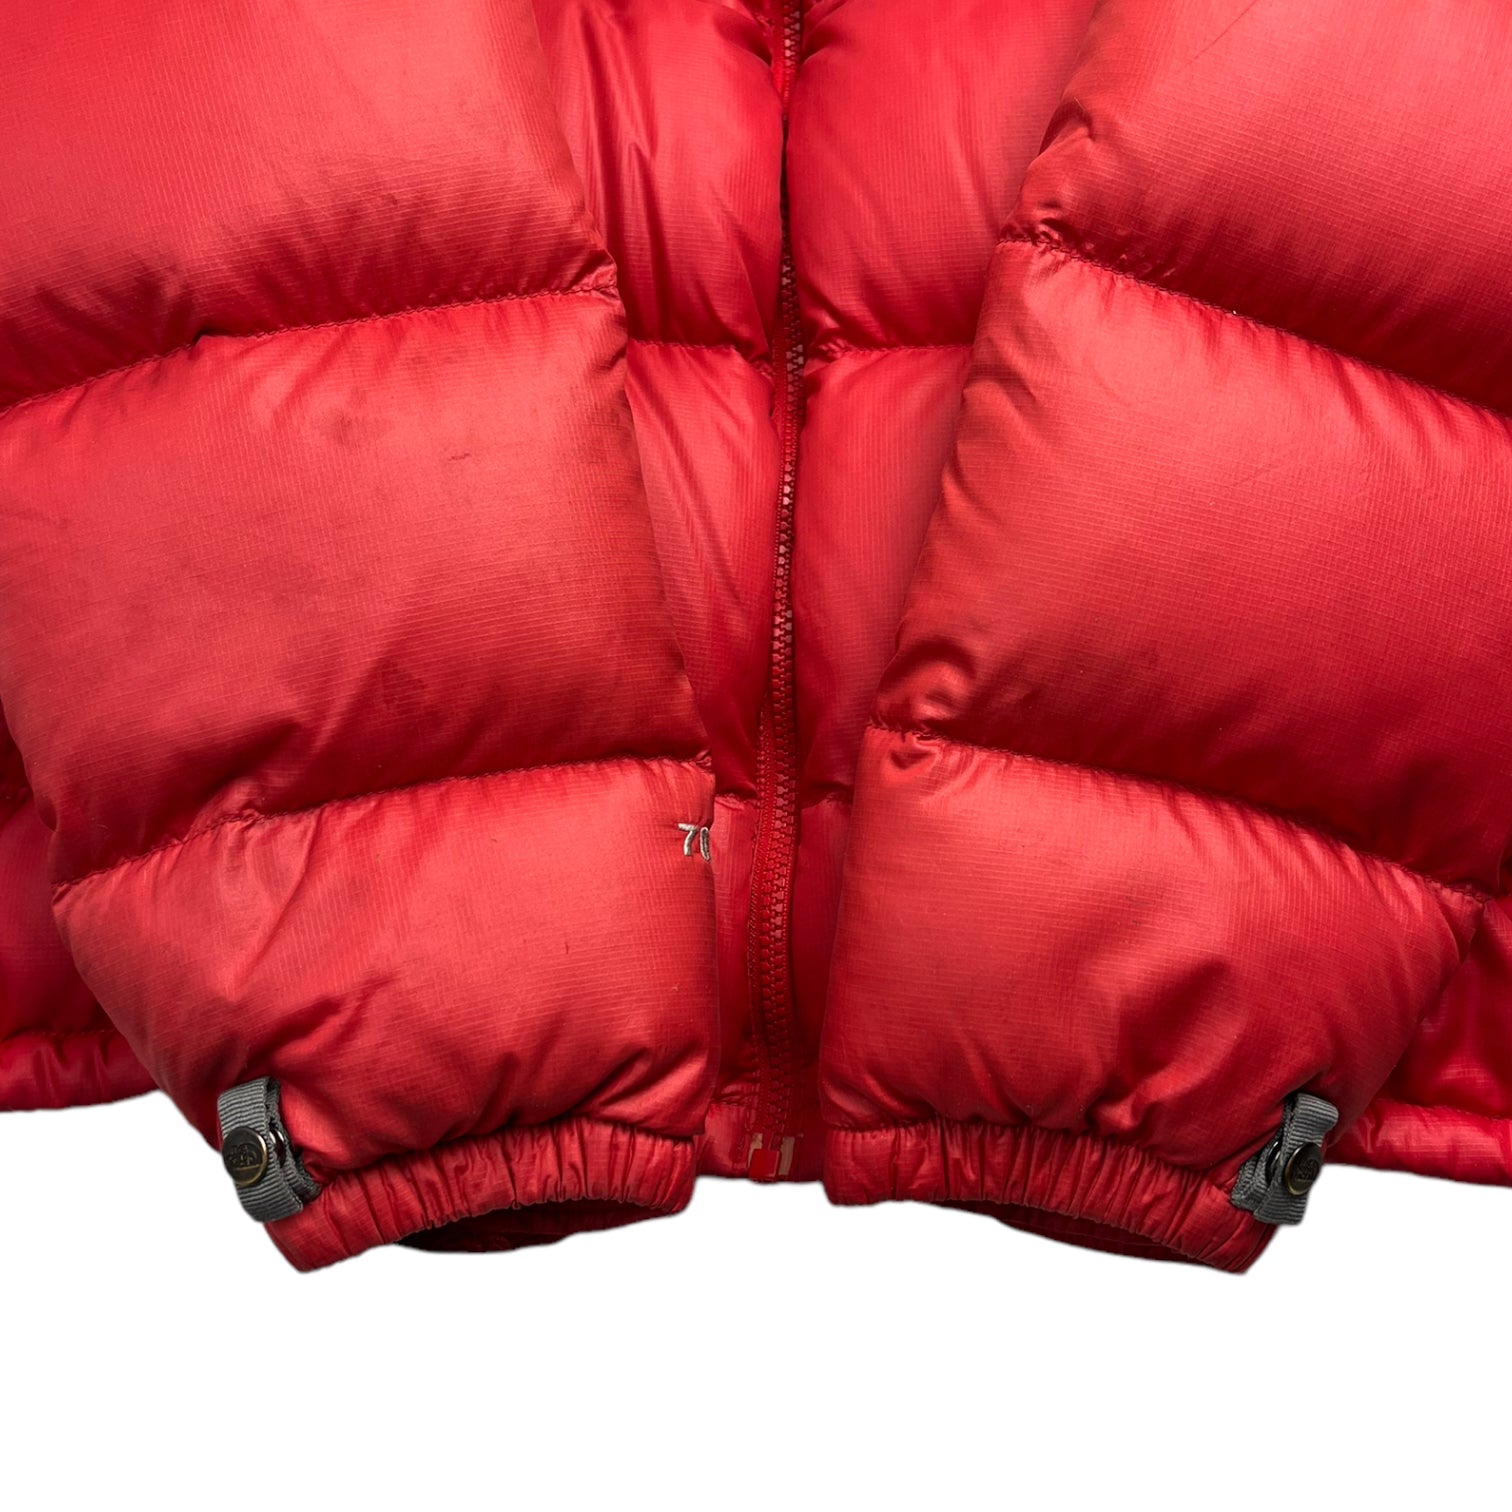 The North Face 700 Puffer Jacket Deep Coral (Women’s)